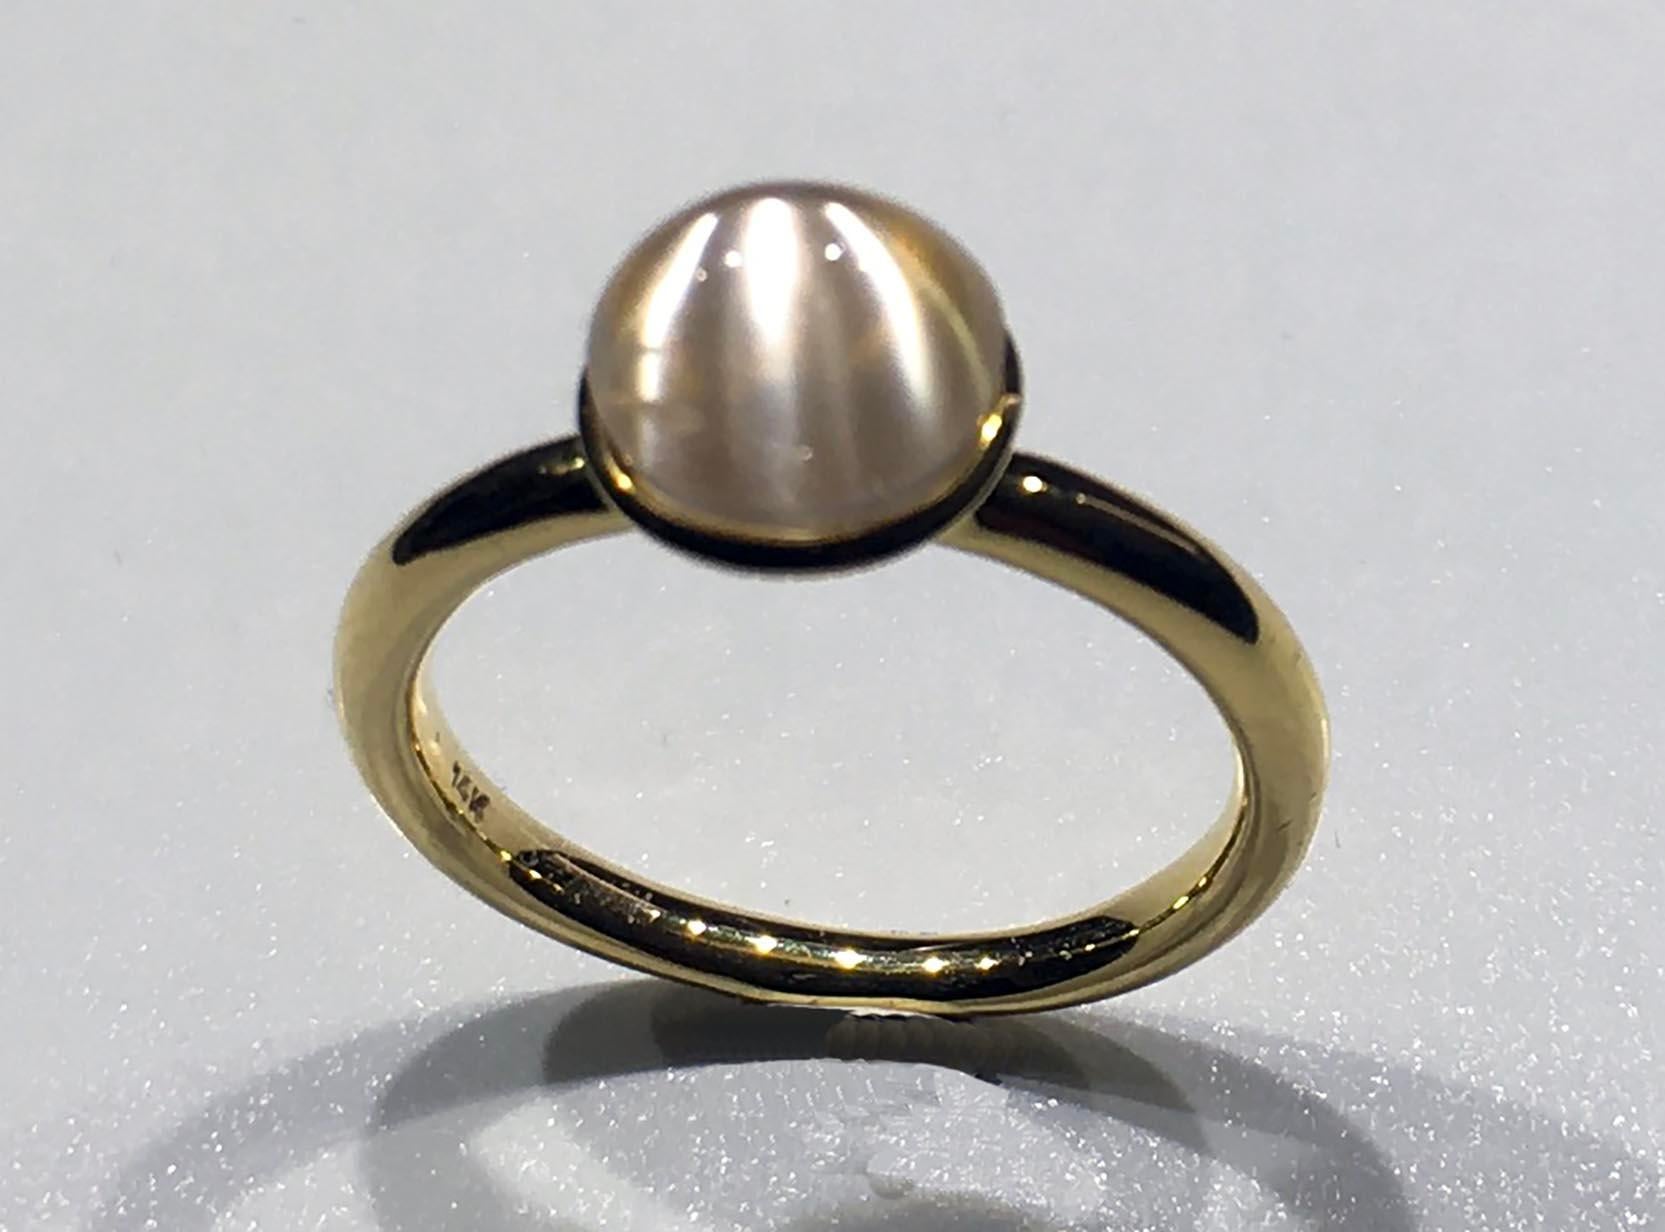 Kary Adam Designed, Burmese Moonstone Ring set in 14kt Gold. This Lovely Burmese Moonstone Ring is in 14kt Gold and sized at 6.5 US. The Moonstone is a large 7MM Cabochon of 2.7 Carats. 

Originally from San Diego, California, Kary Adam lived in the